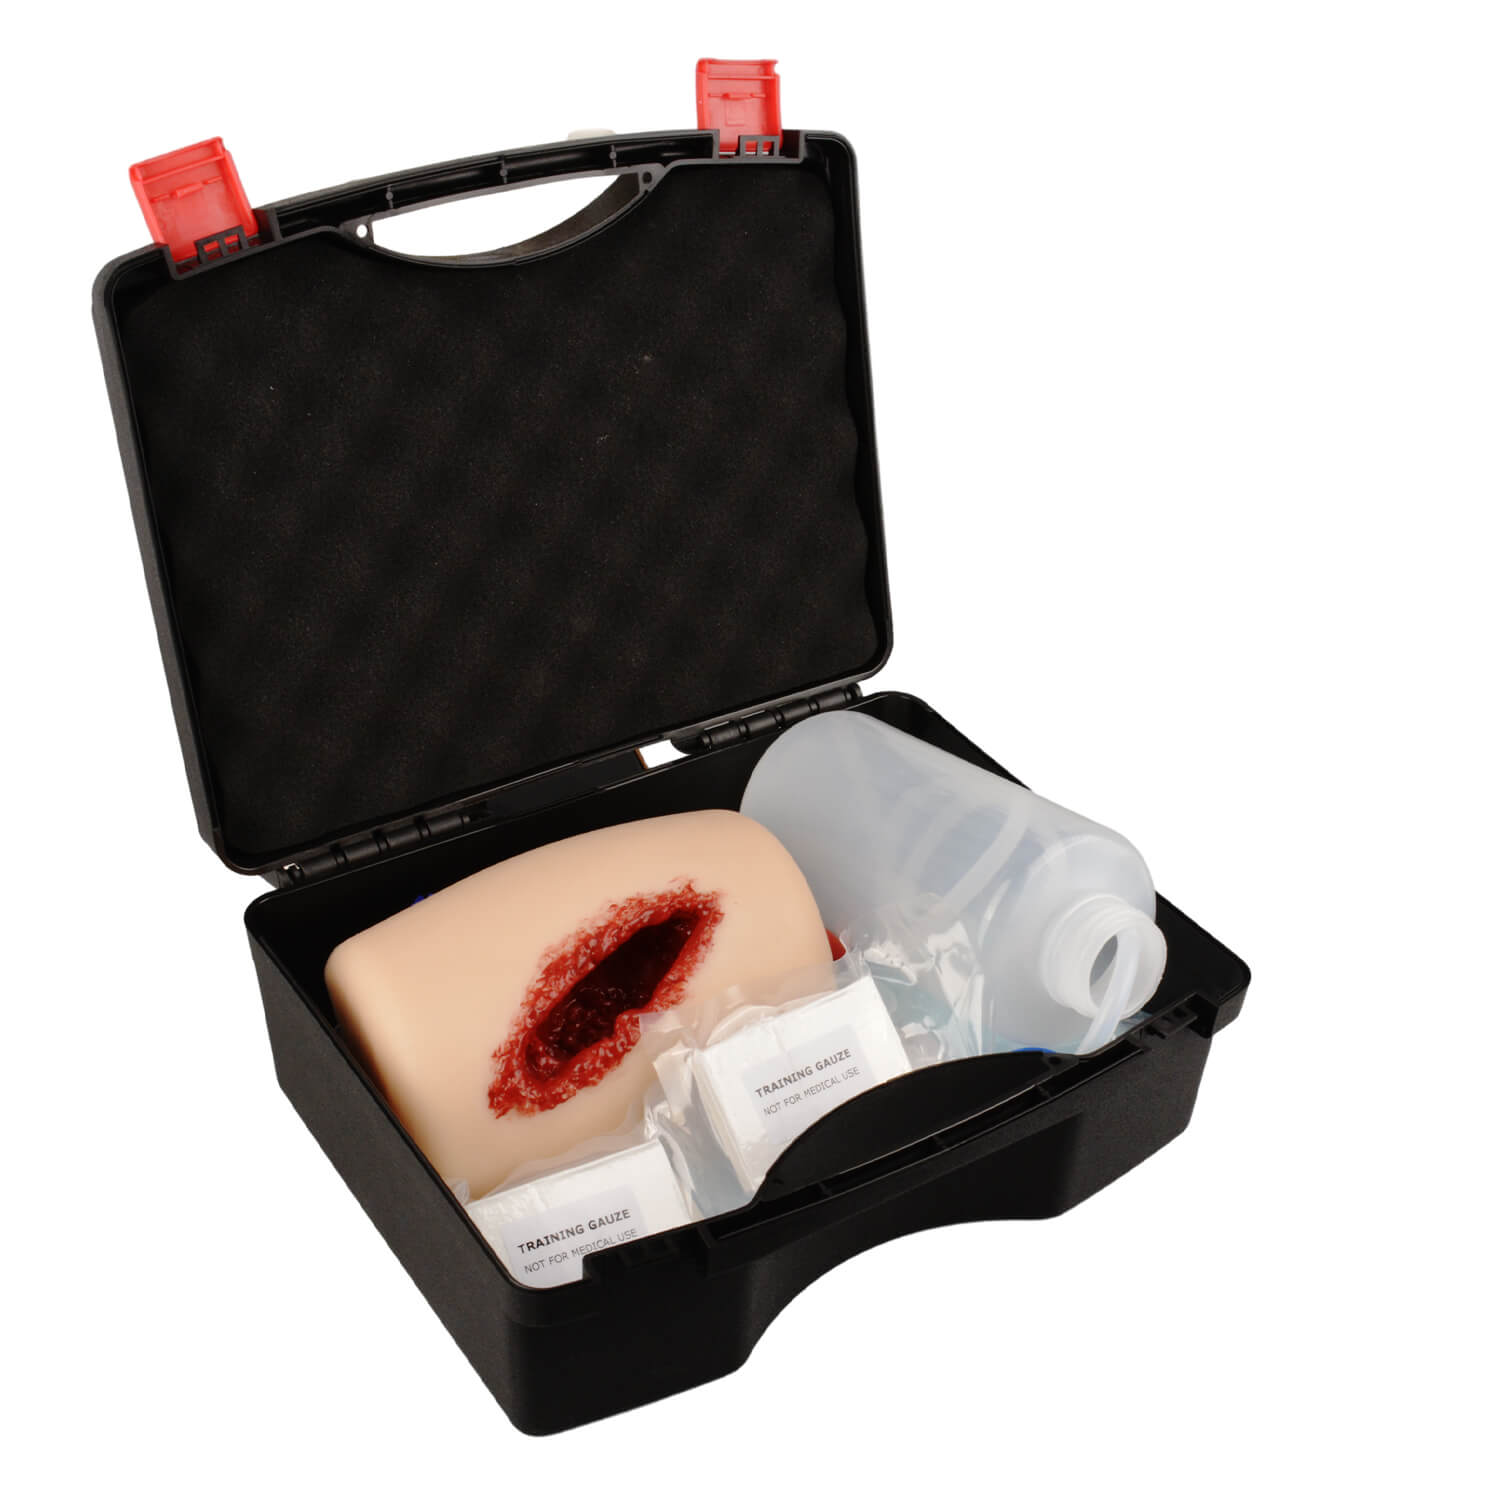 Thigh Laceration Wound Packing Trainer Kit